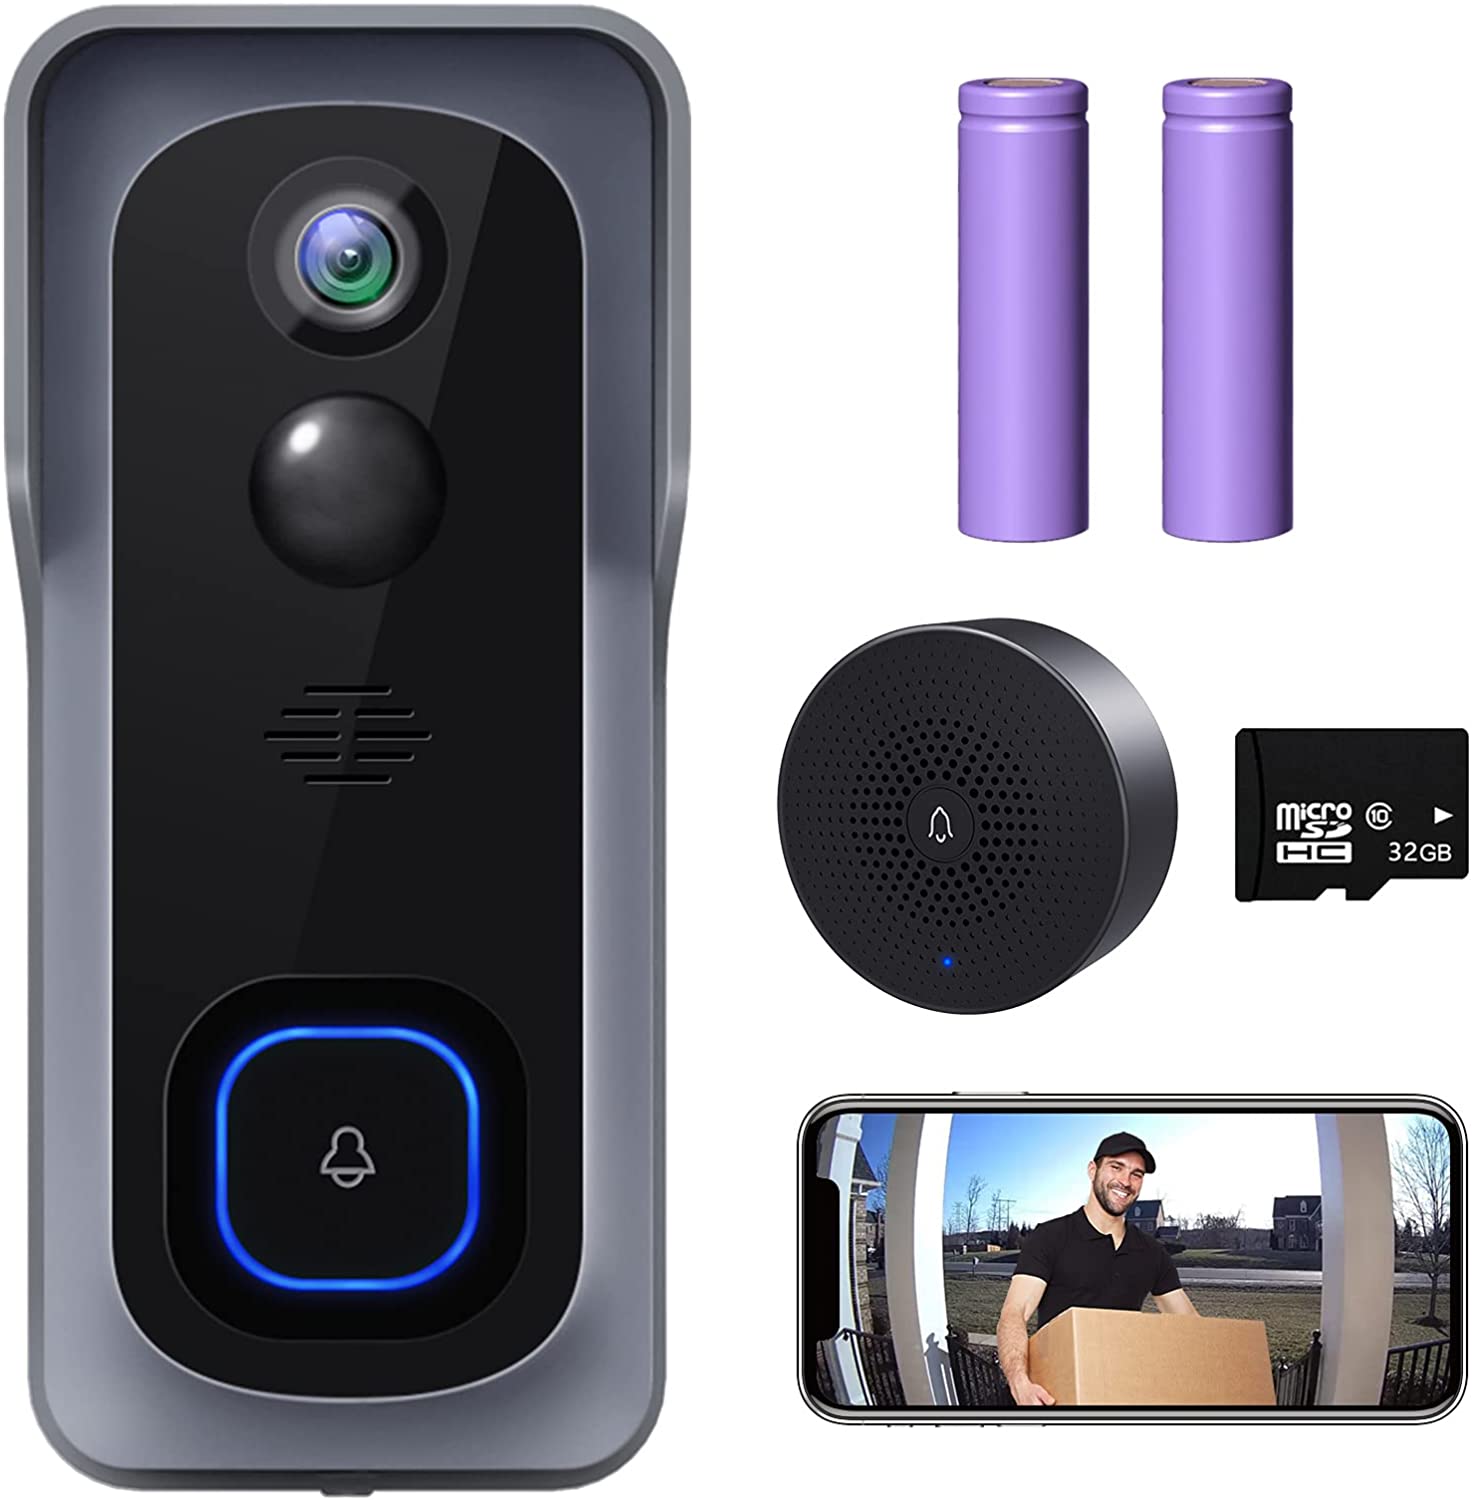 7 Best Video Doorbell Without Subscription in 2022